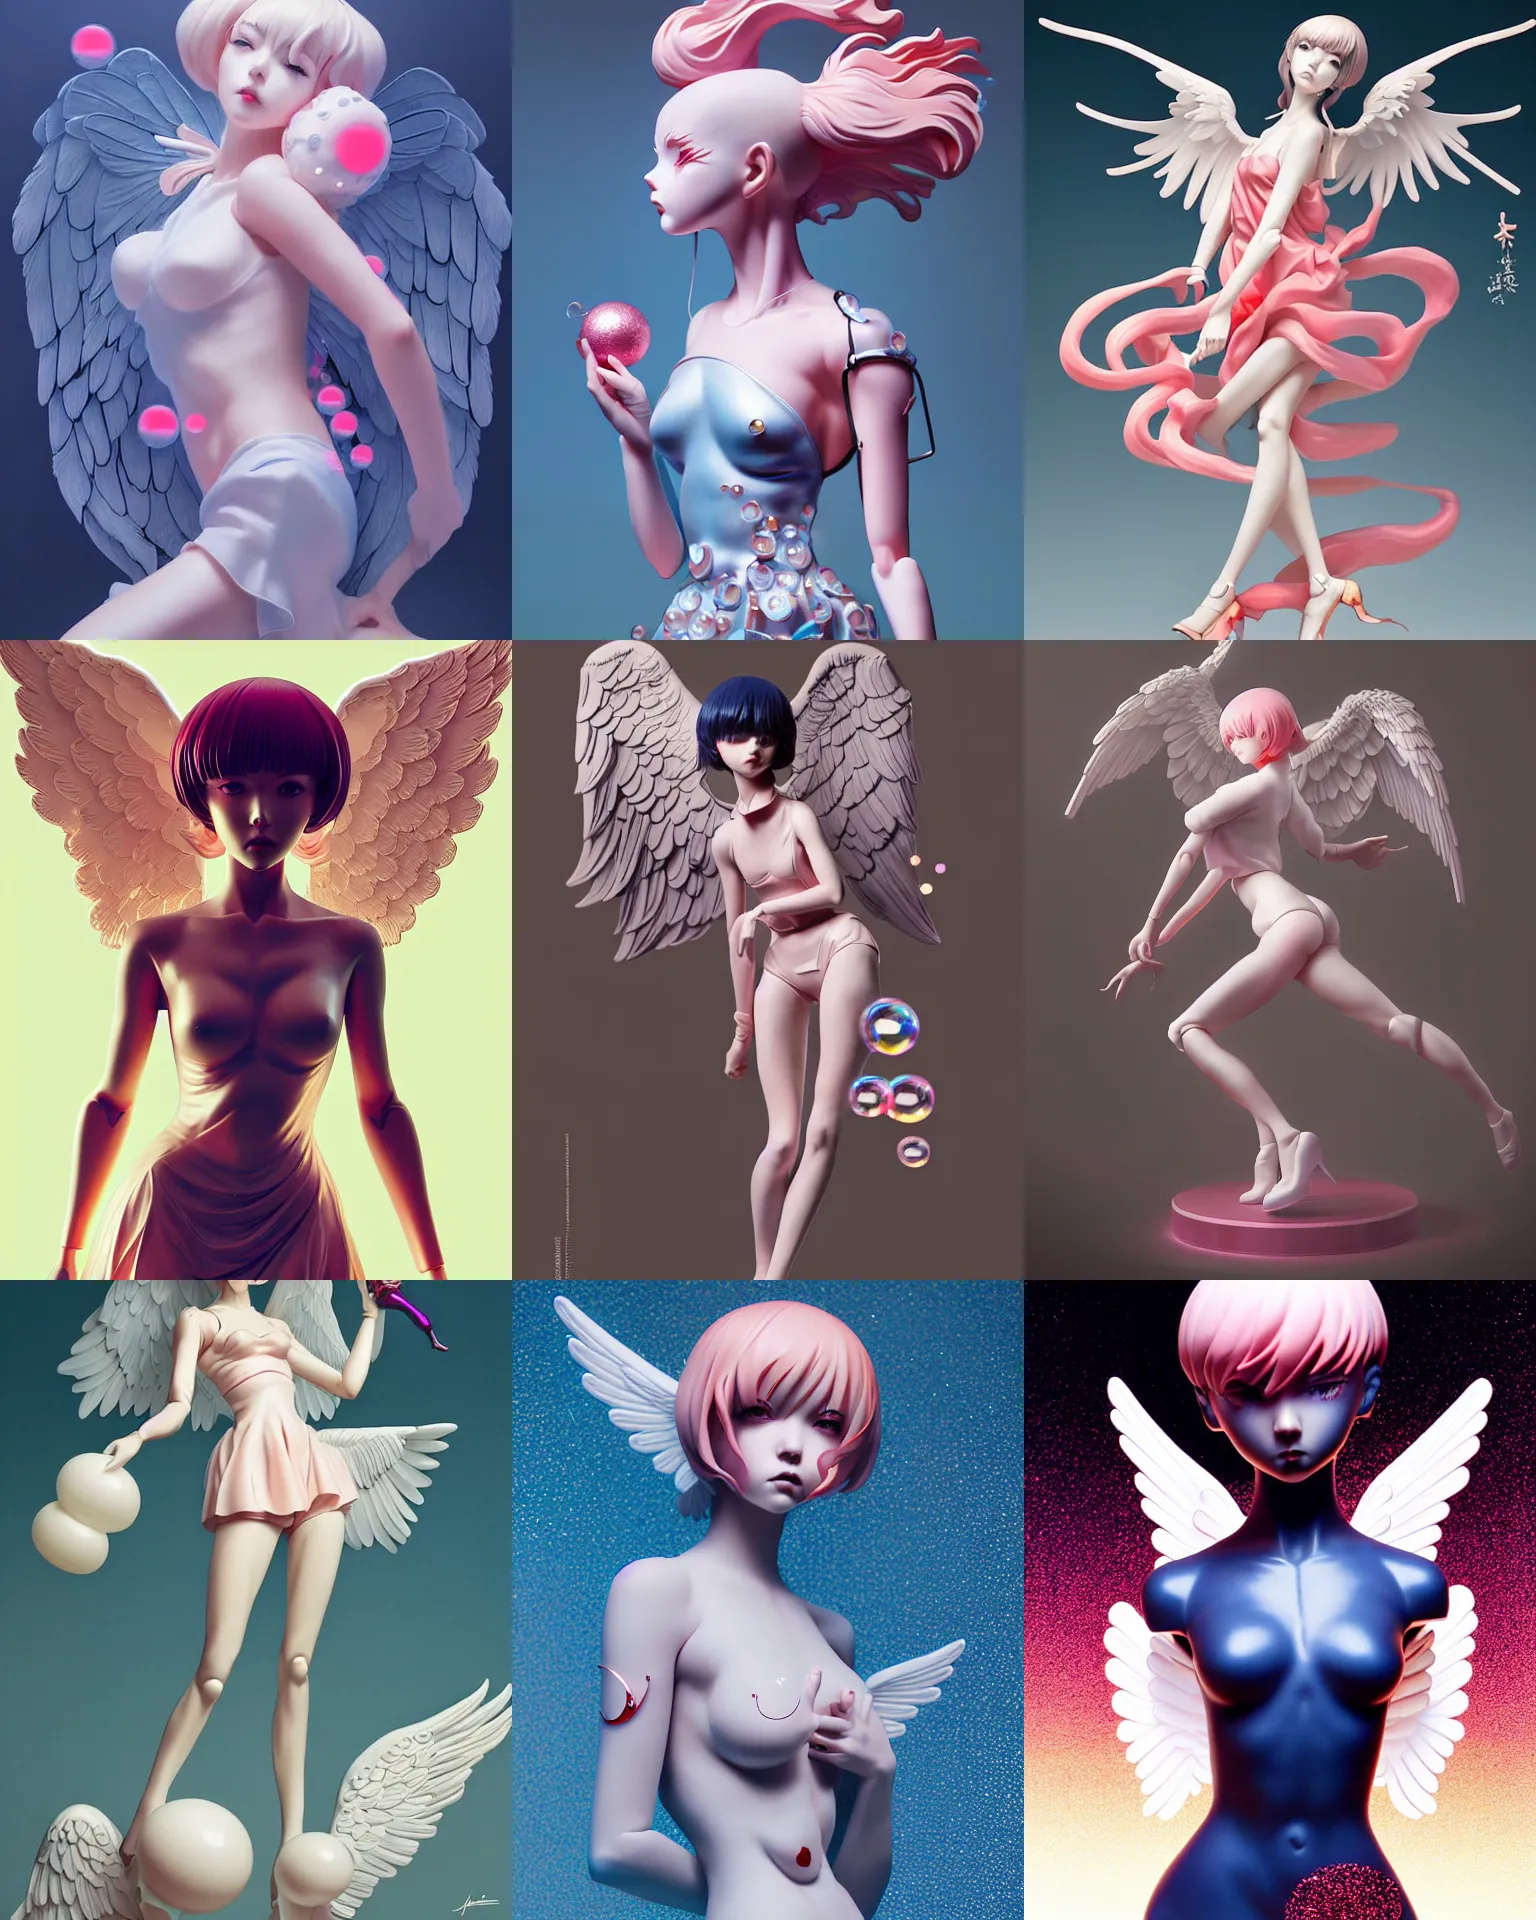 Prompt: james jean, wlop, ilya kuvshinov isolated vinyl figure angel bubbles, expert figure photography, dynamic pose, interesting color palette material effects, glitter accents on figure, anime stylized, accurate proportions artgerm realism, high delicate defined details, holographic undertones, ethereal lighting, editorial awarded